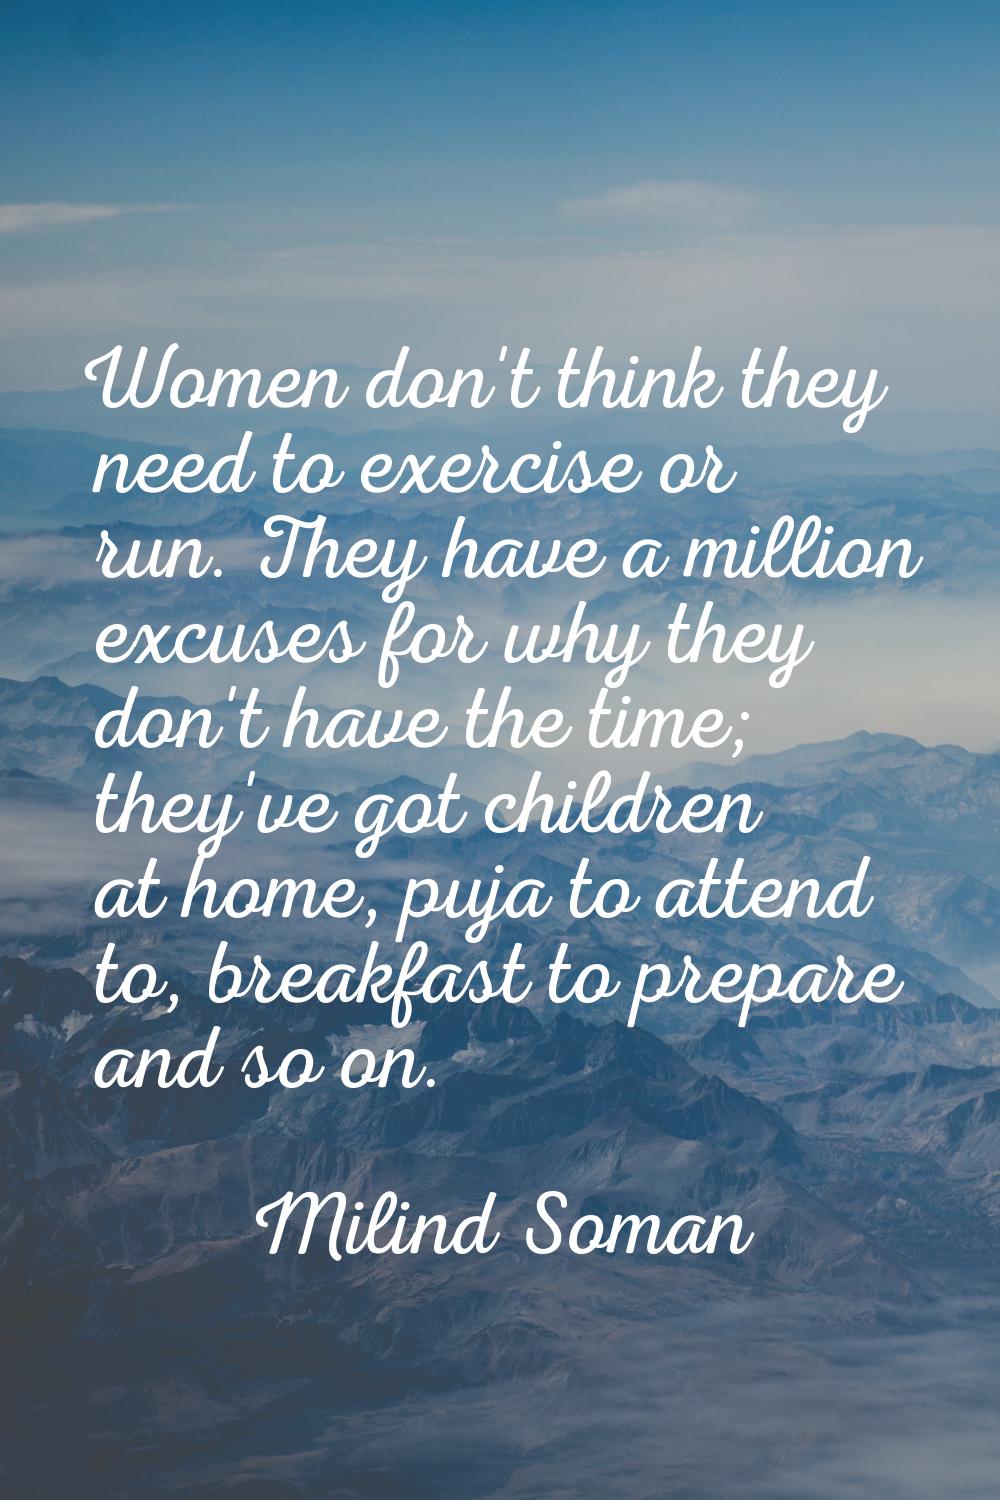 Women don't think they need to exercise or run. They have a million excuses for why they don't have